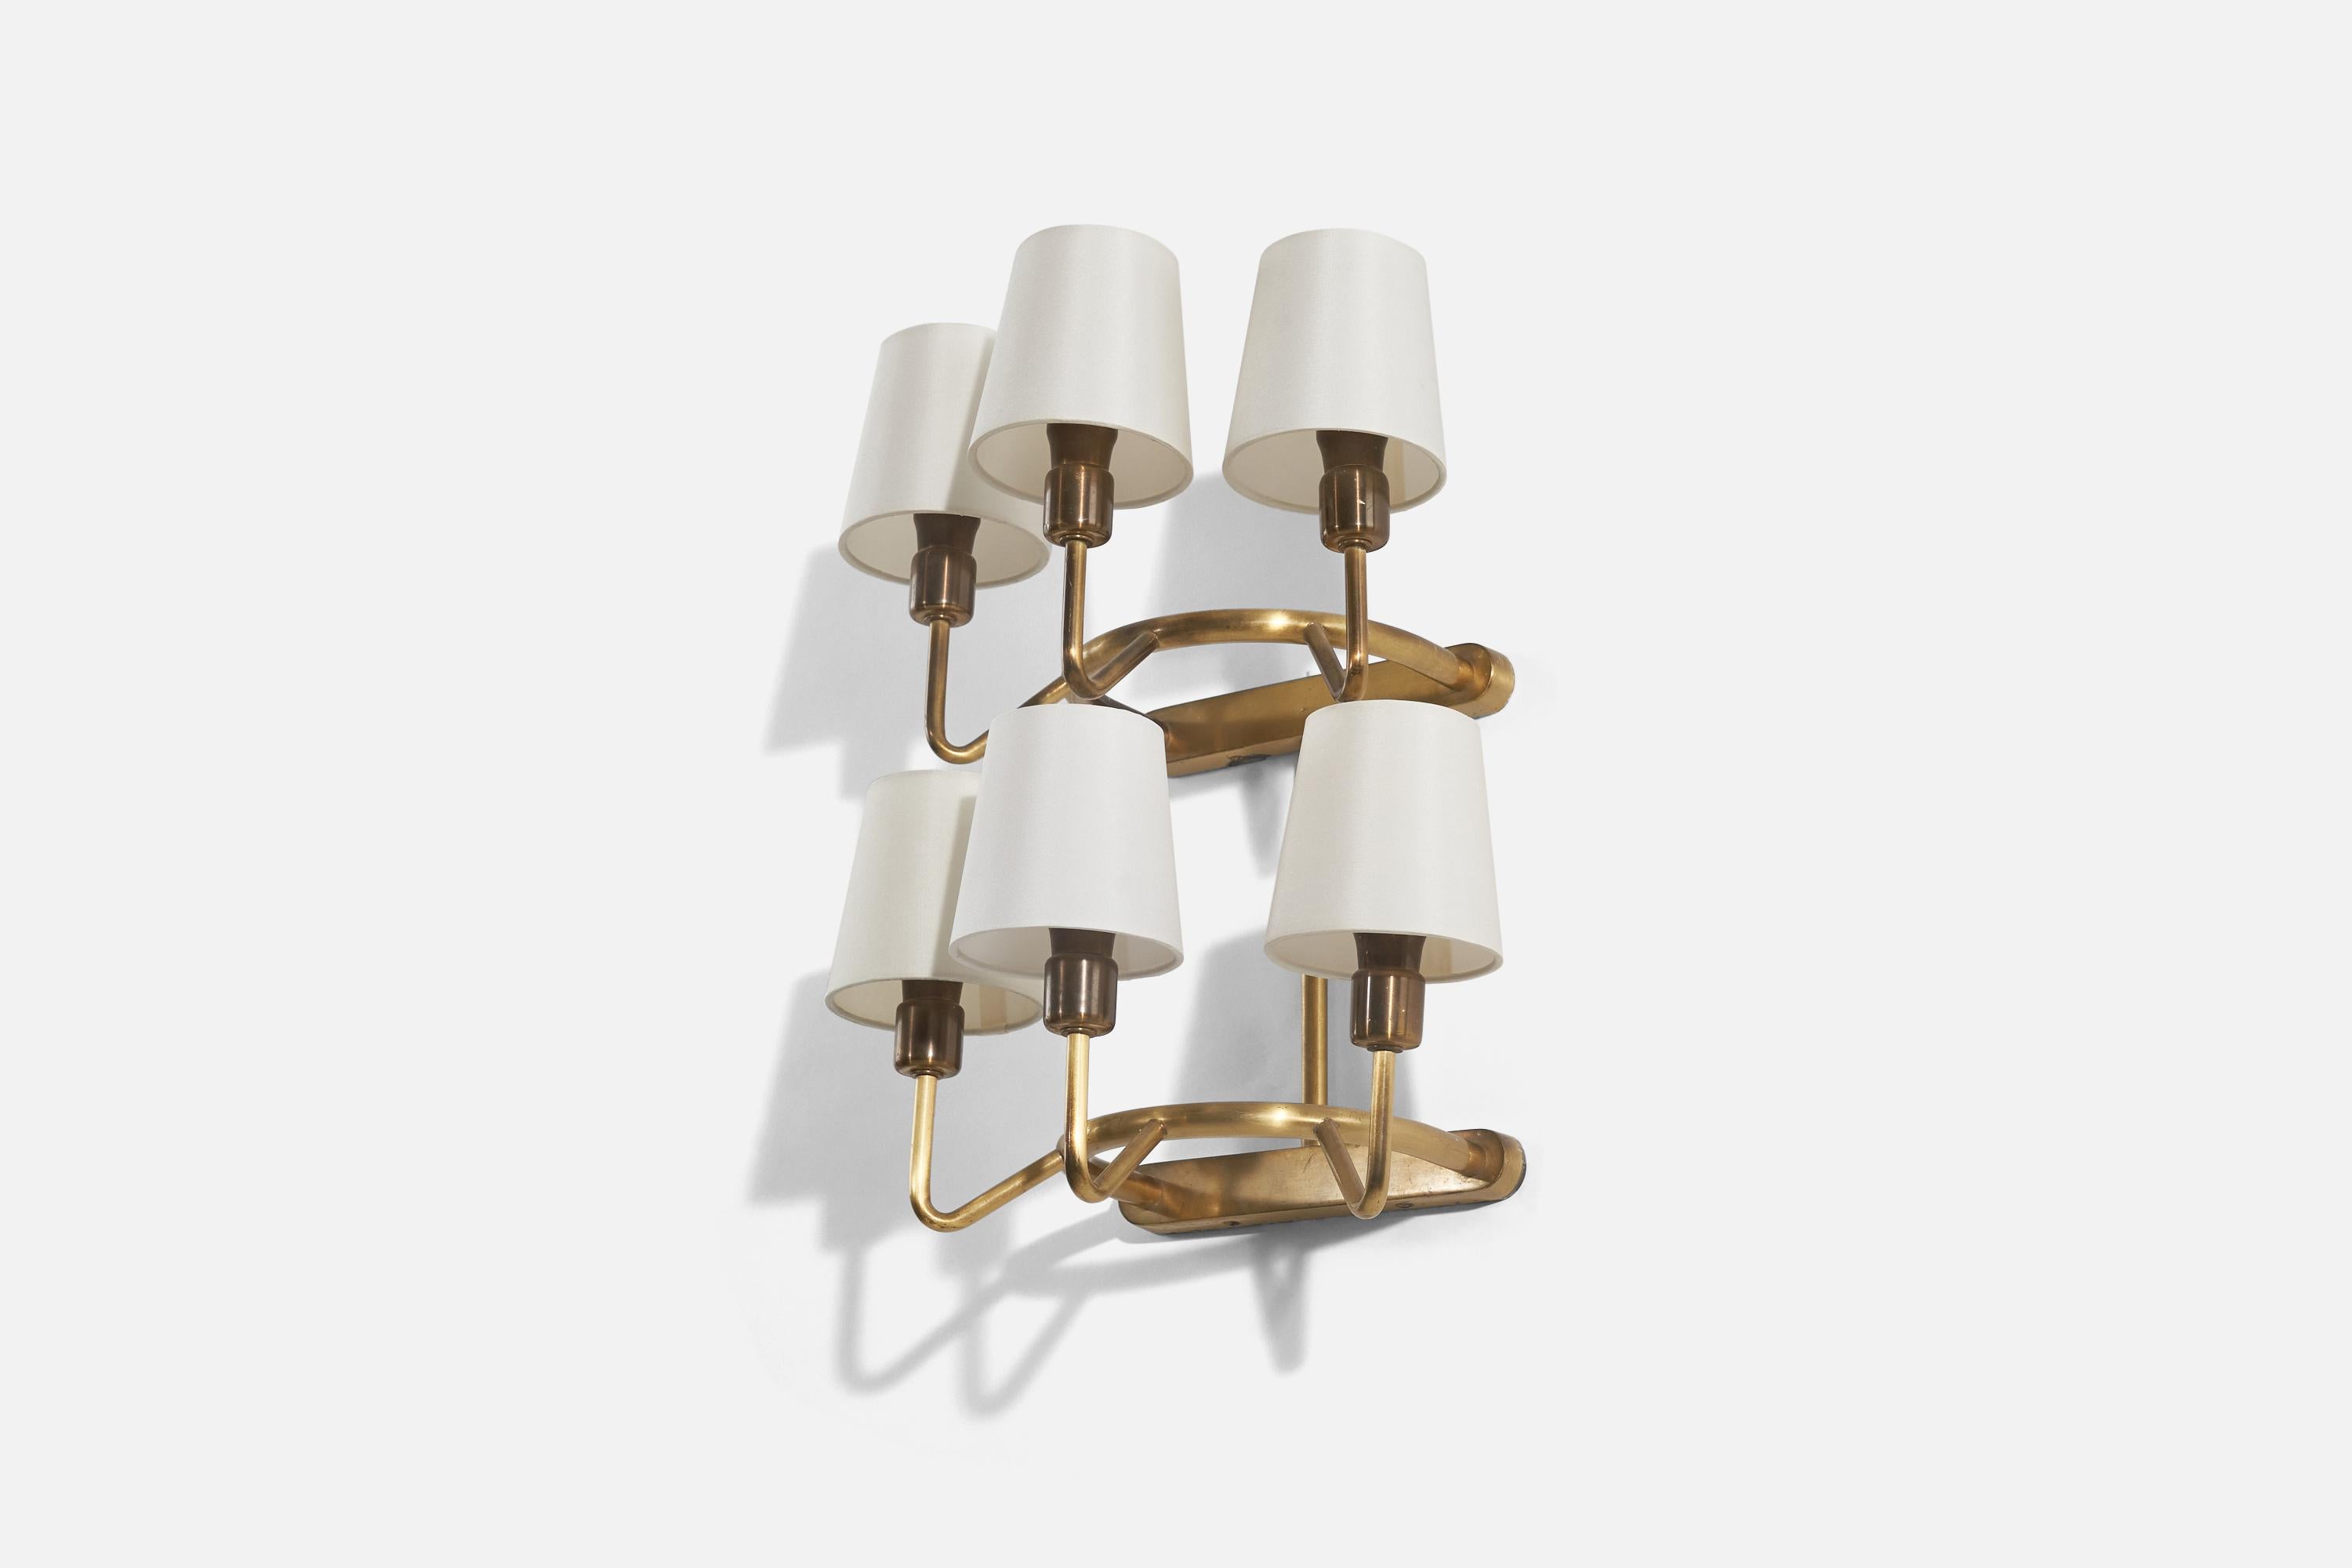 Danish Designer, 6-light Sconces, Brass, Fabric, Denmark, 1940s In Good Condition For Sale In High Point, NC